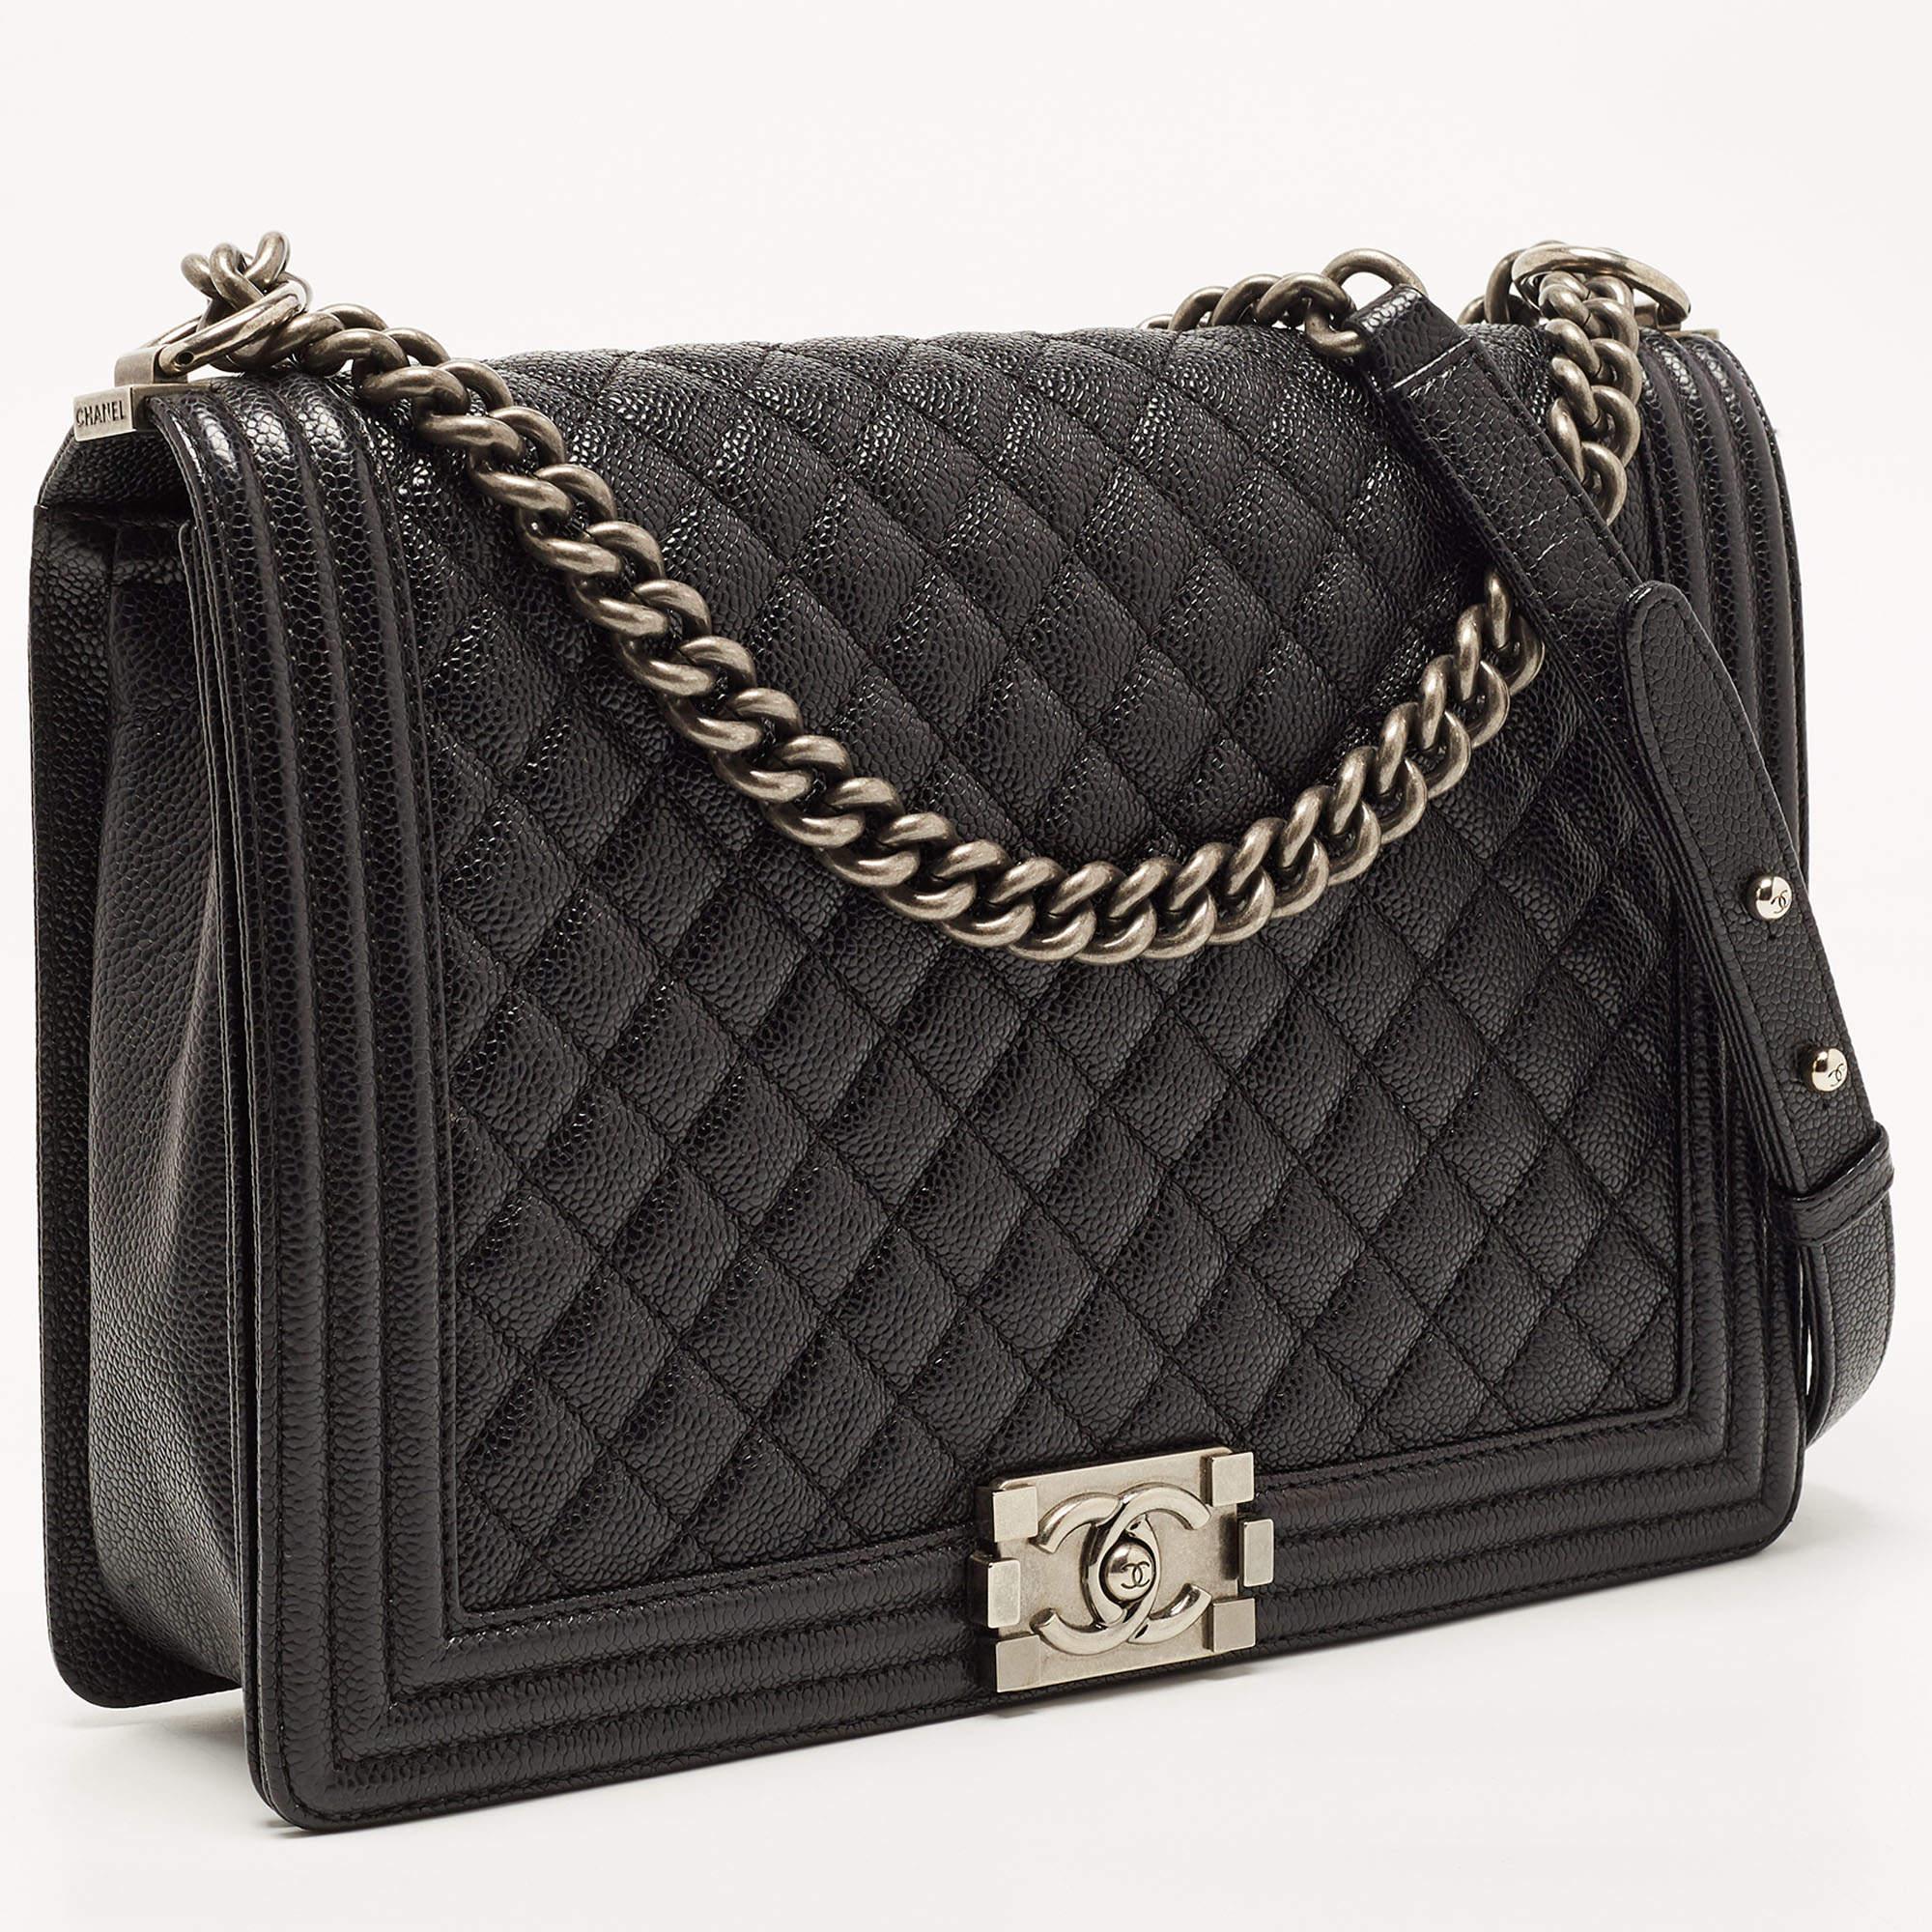 Women's Chanel Black Quilted Caviar Leather Large Boy Flap Bag